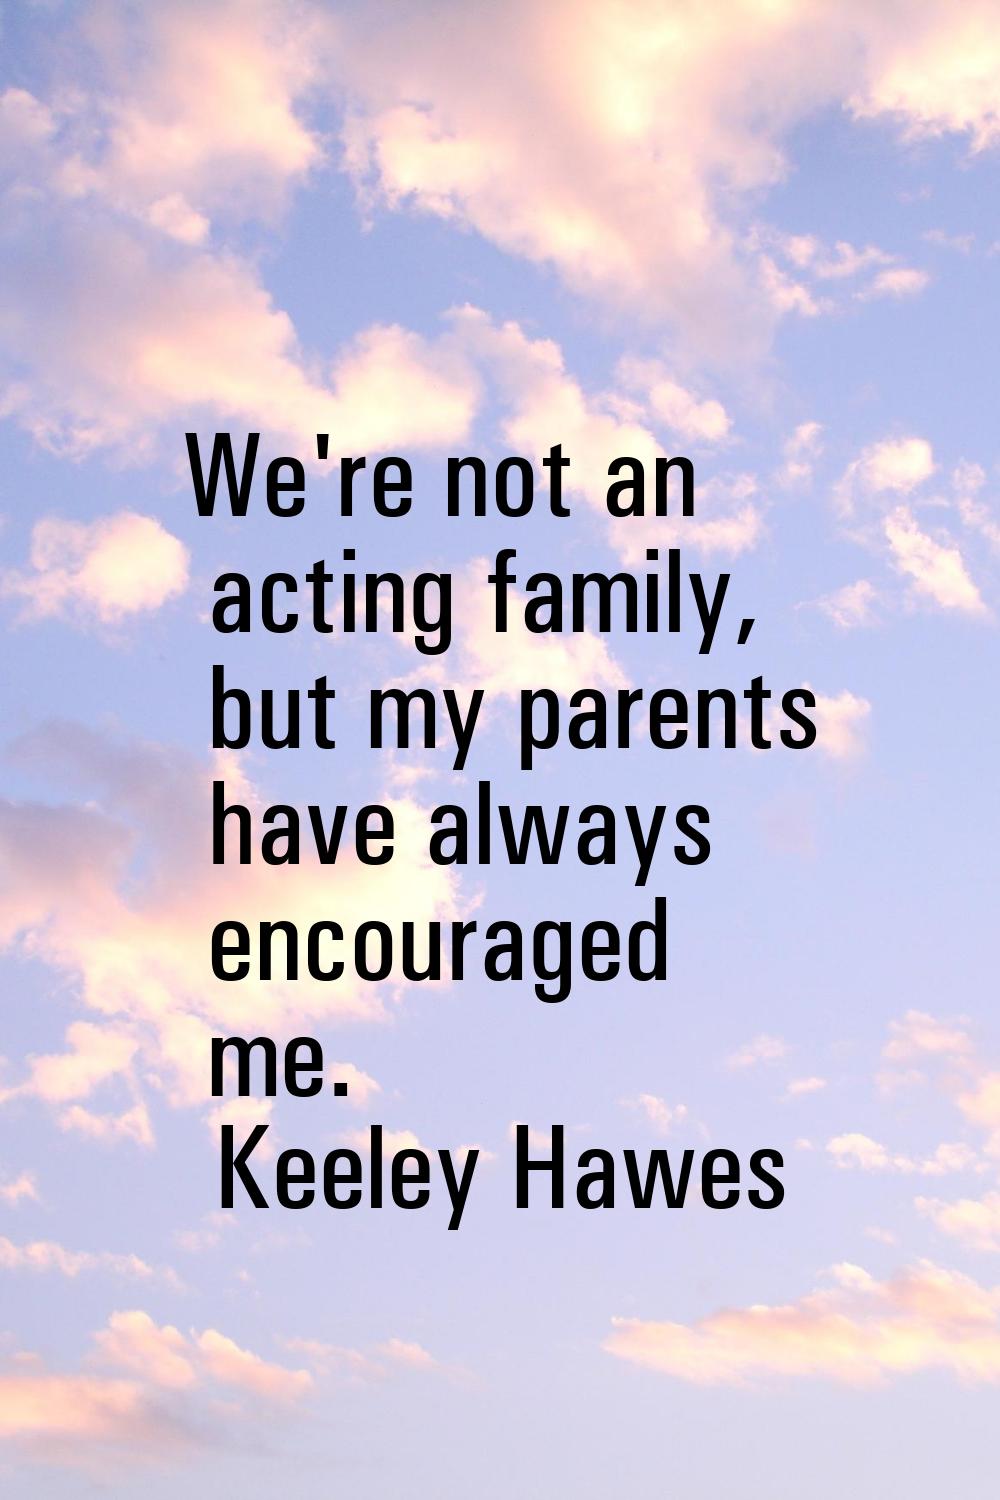 We're not an acting family, but my parents have always encouraged me.